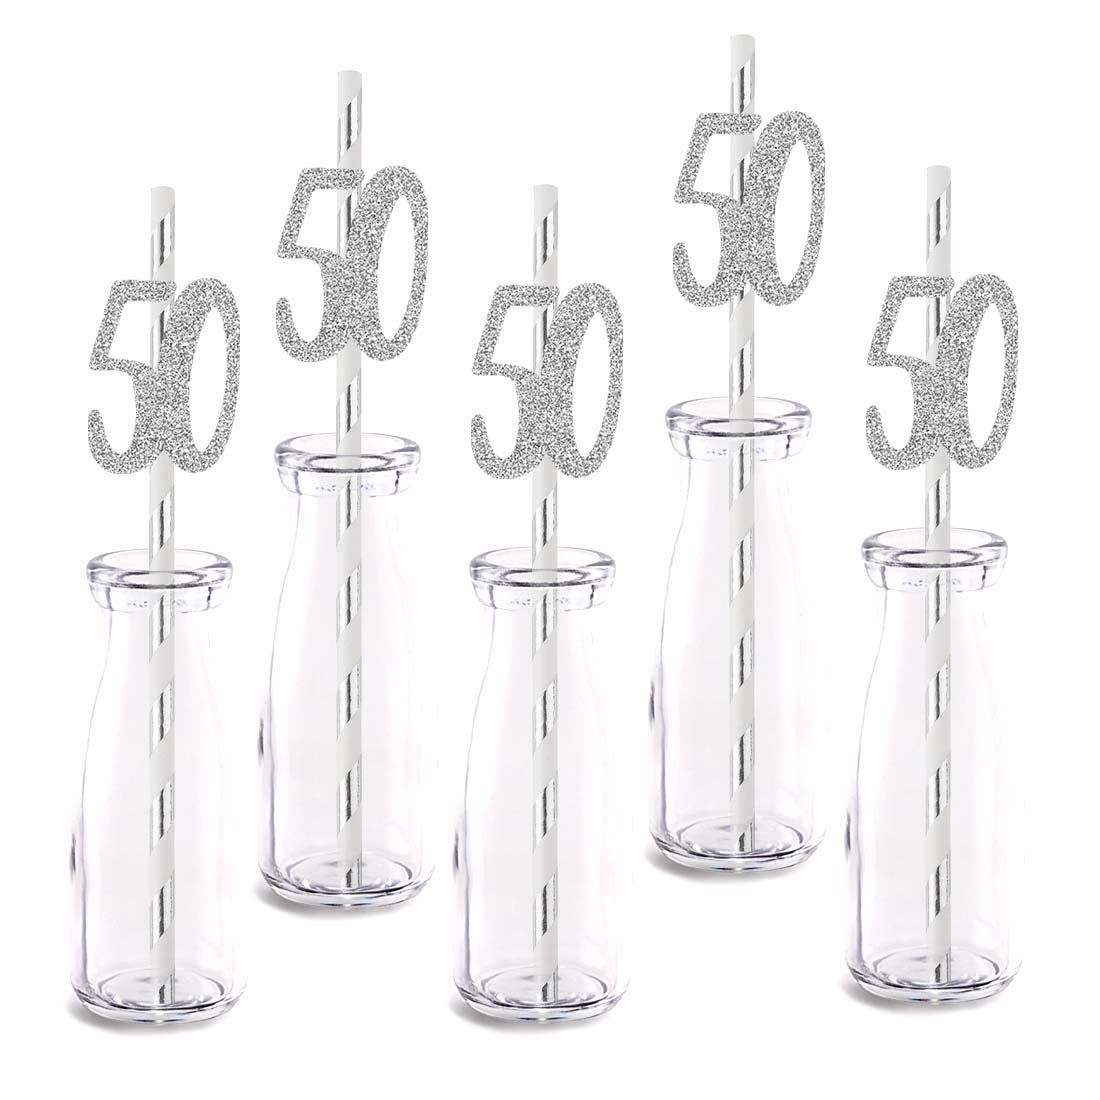 Silver Happy 50th Birthday Straw Decor, Silver Glitter 24pcs Cut-Out Number 50 Party Drinking Decorative Straws, Supplies